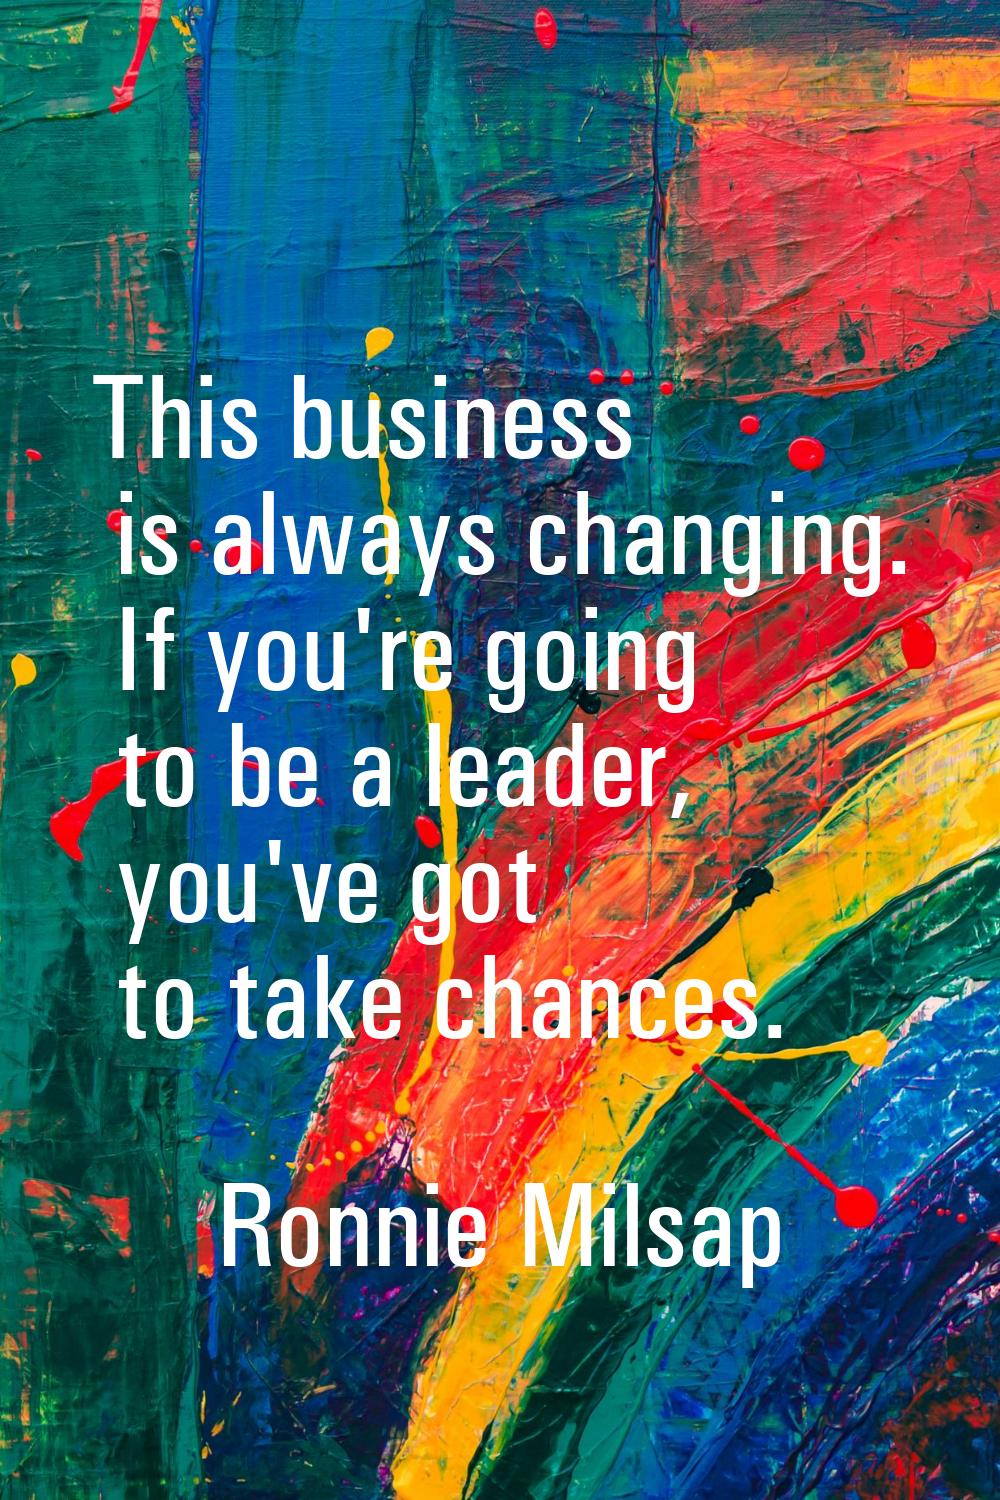 This business is always changing. If you're going to be a leader, you've got to take chances.